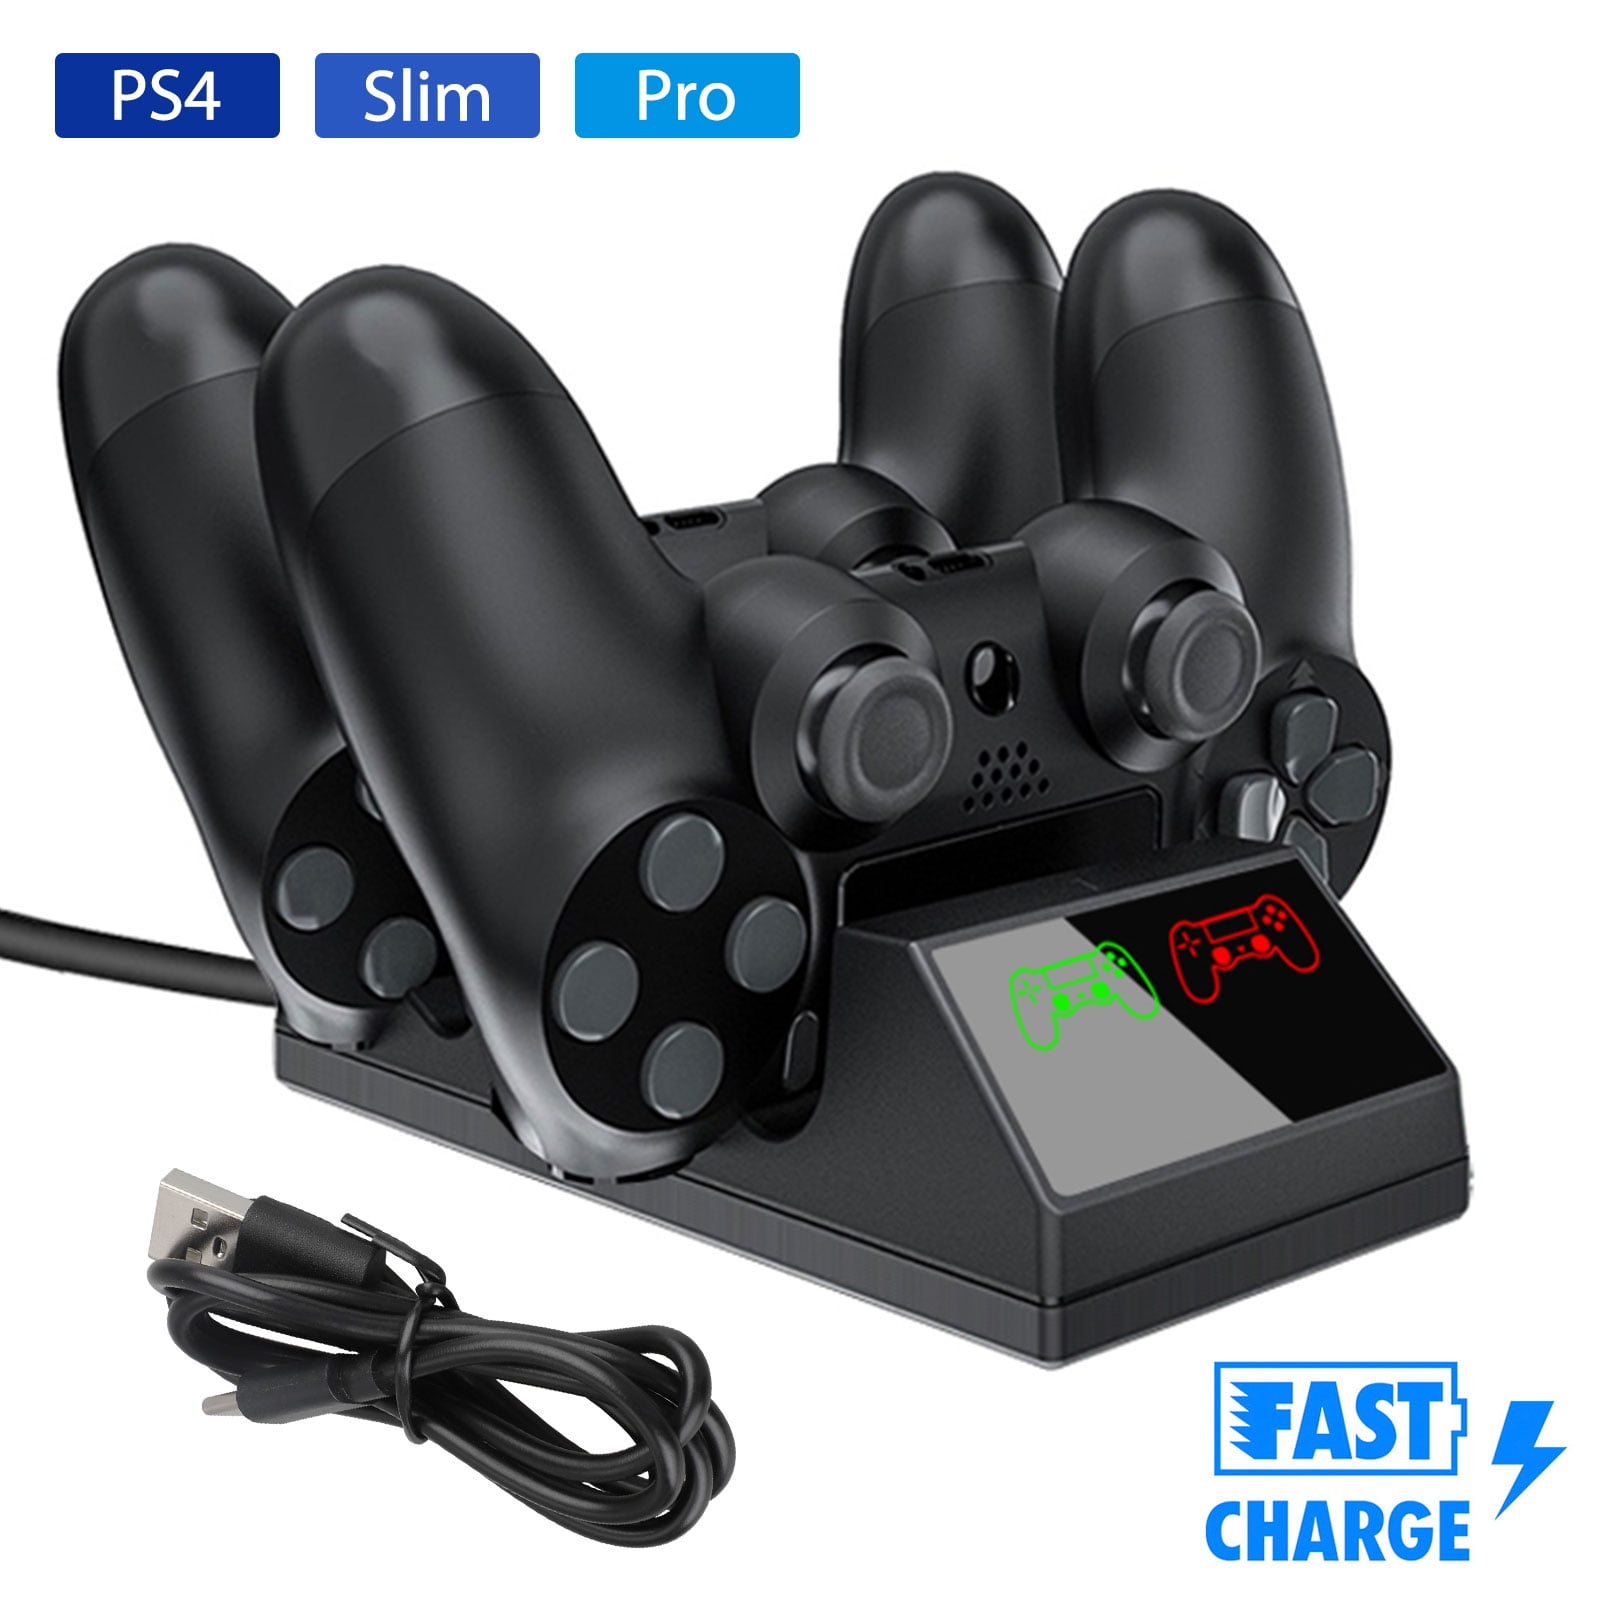 sony official games tower and charging station for ps4